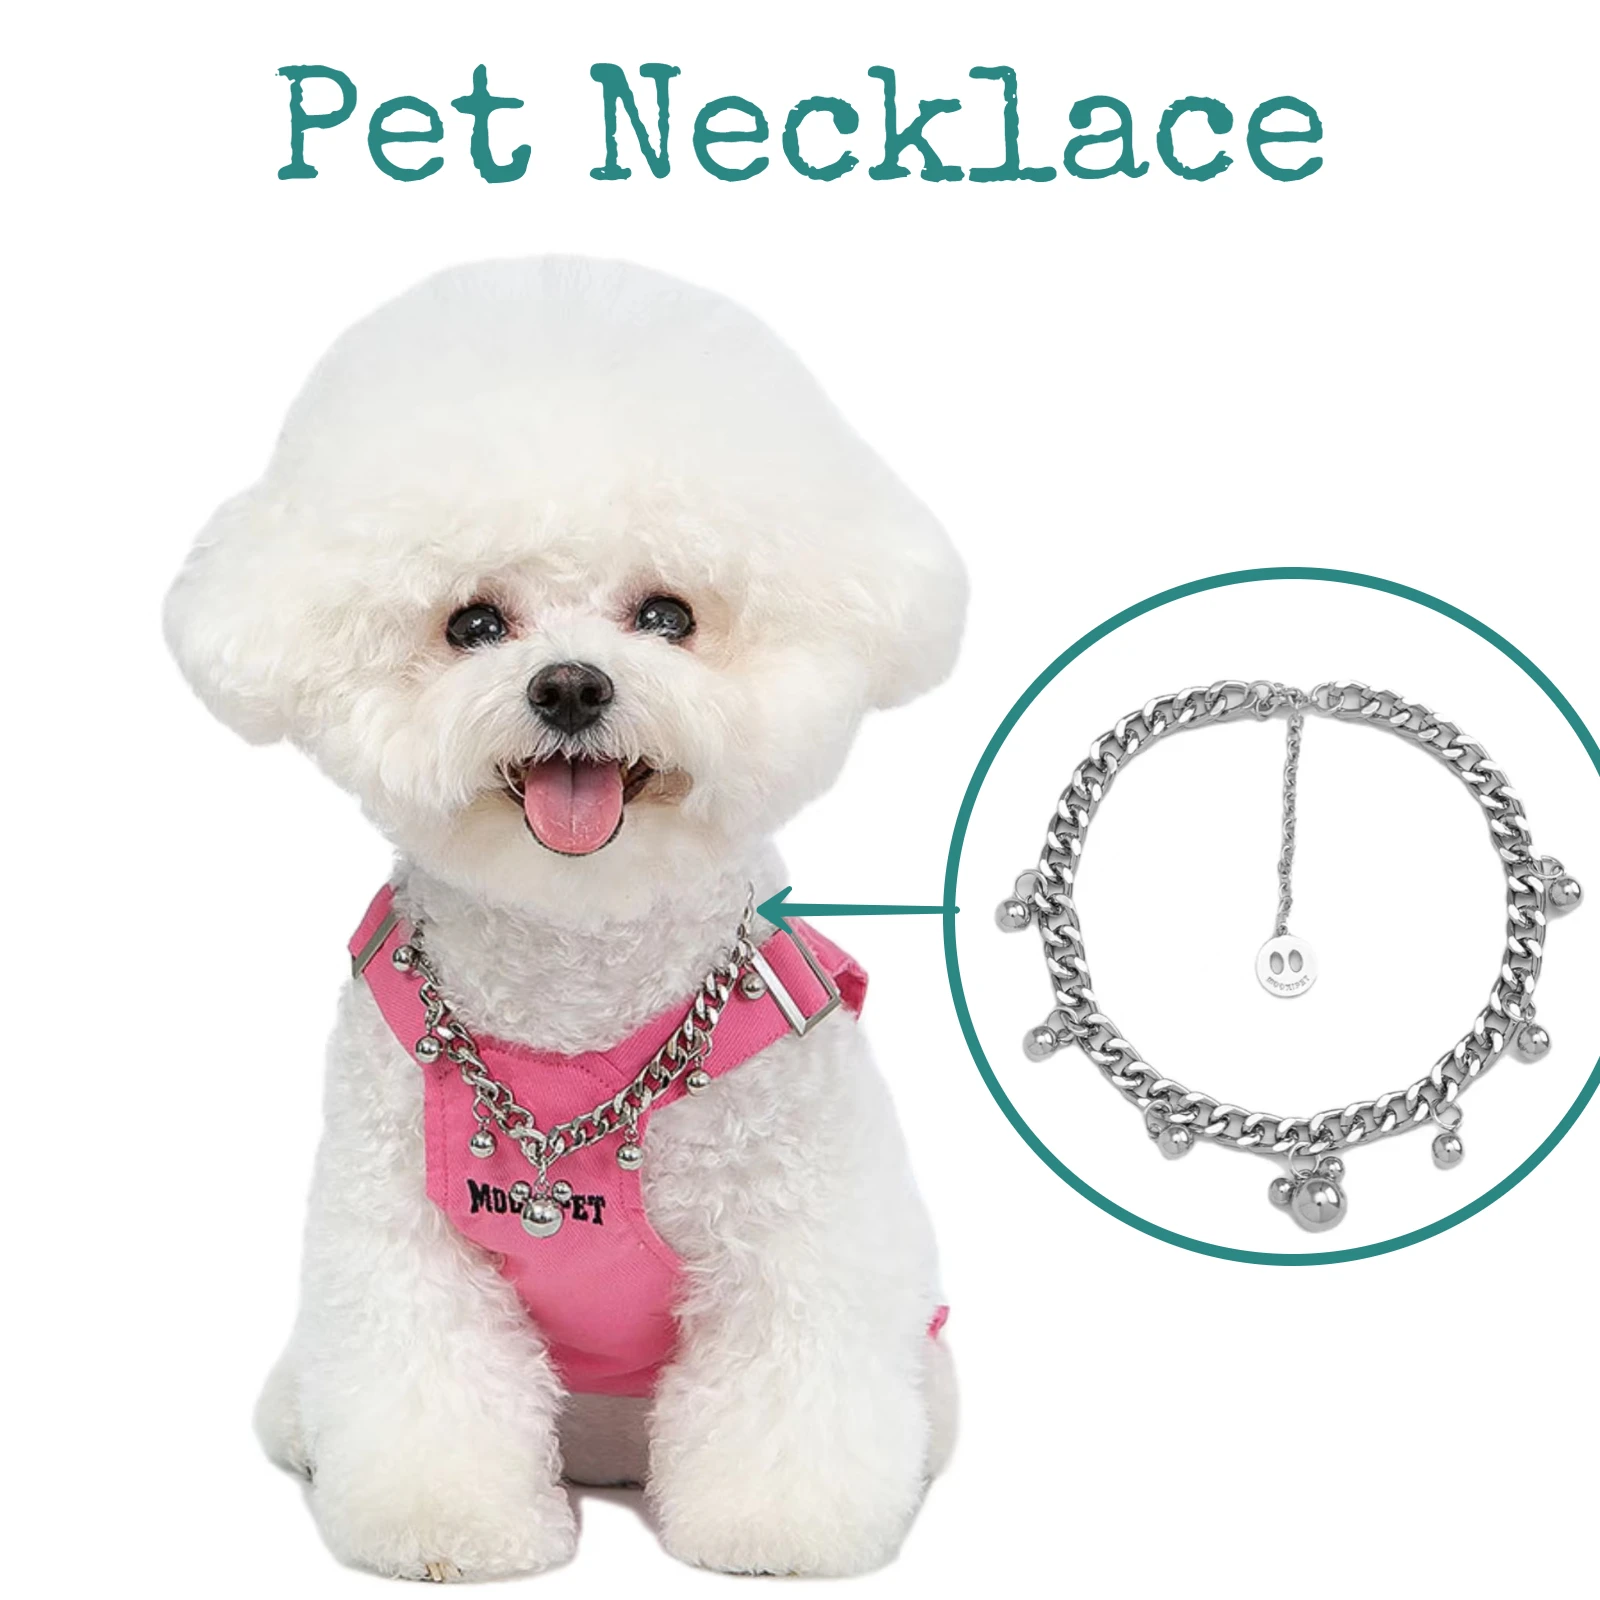 Original Pet Dog Planet Necklace Accessories Cat Small Dog Lovely Bear Style Kawaii Jewelry Bell Collar For Teddy Bichon Cat Toy